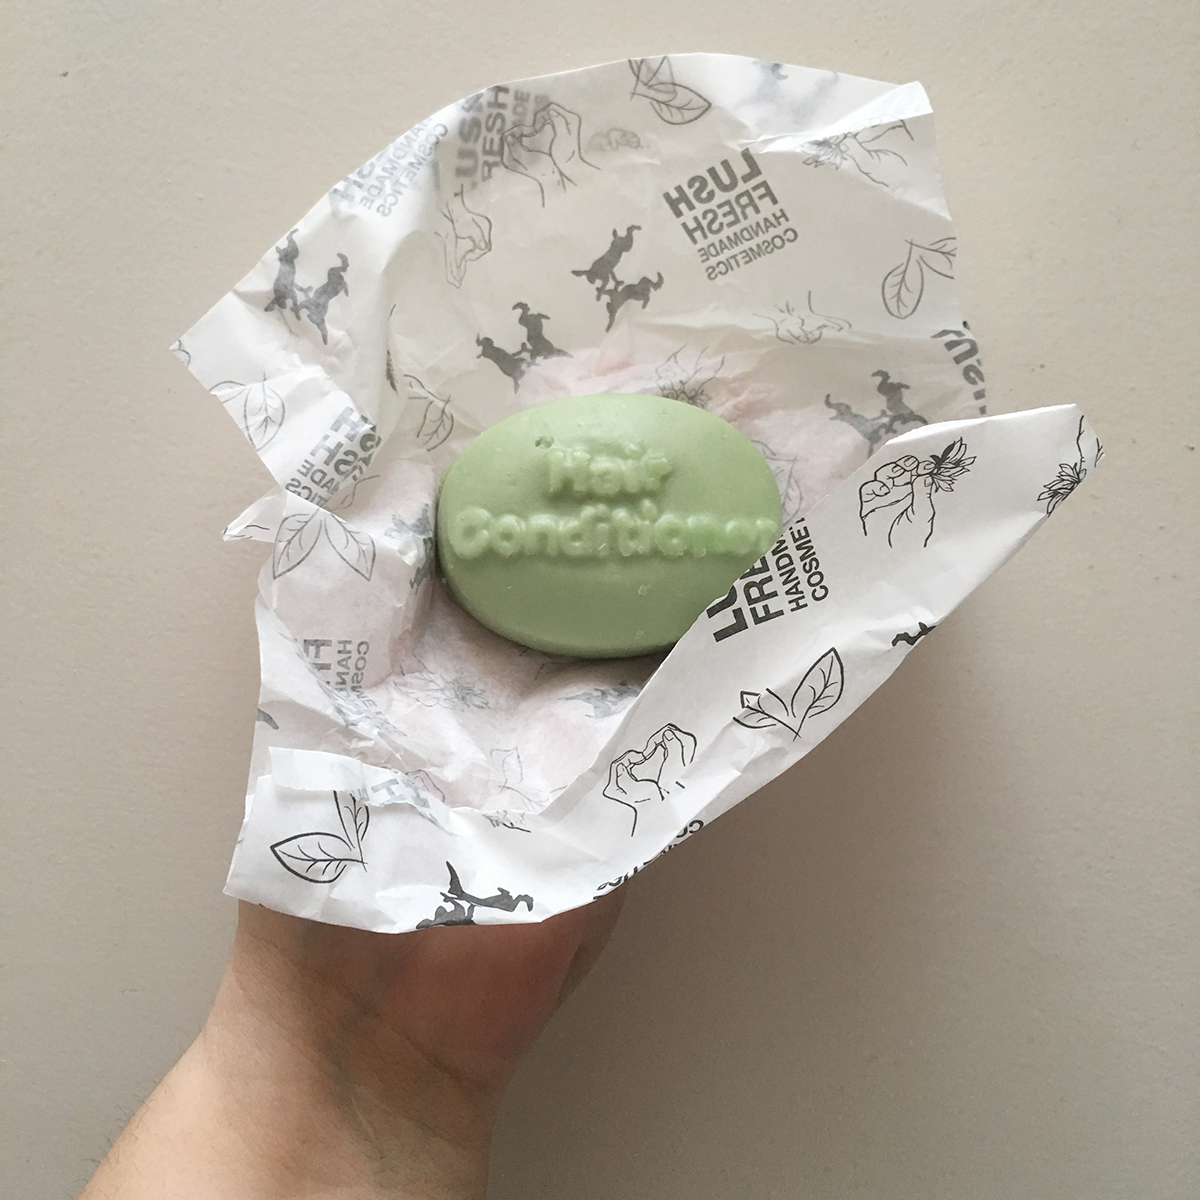 A hand holds up a bar of Lush Jungle Solid Conditioner wrapped in paper